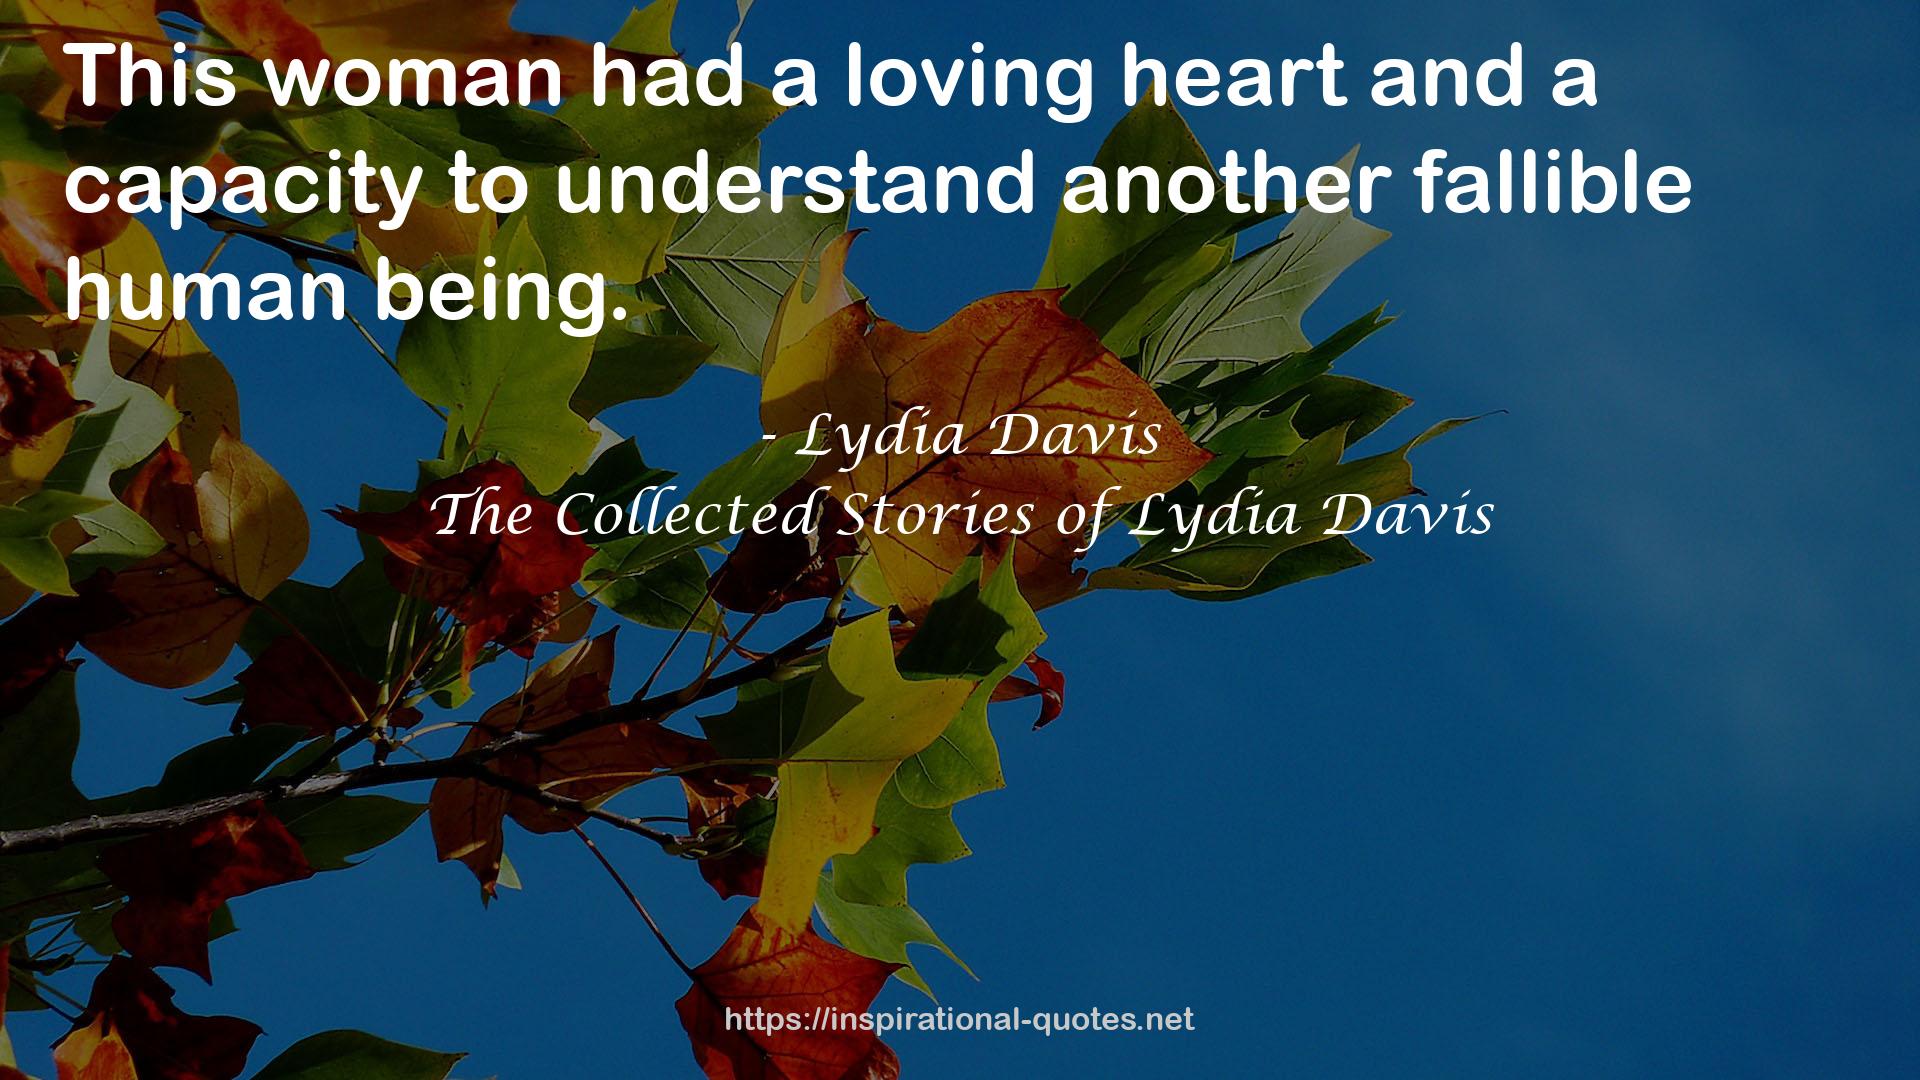 The Collected Stories of Lydia Davis QUOTES